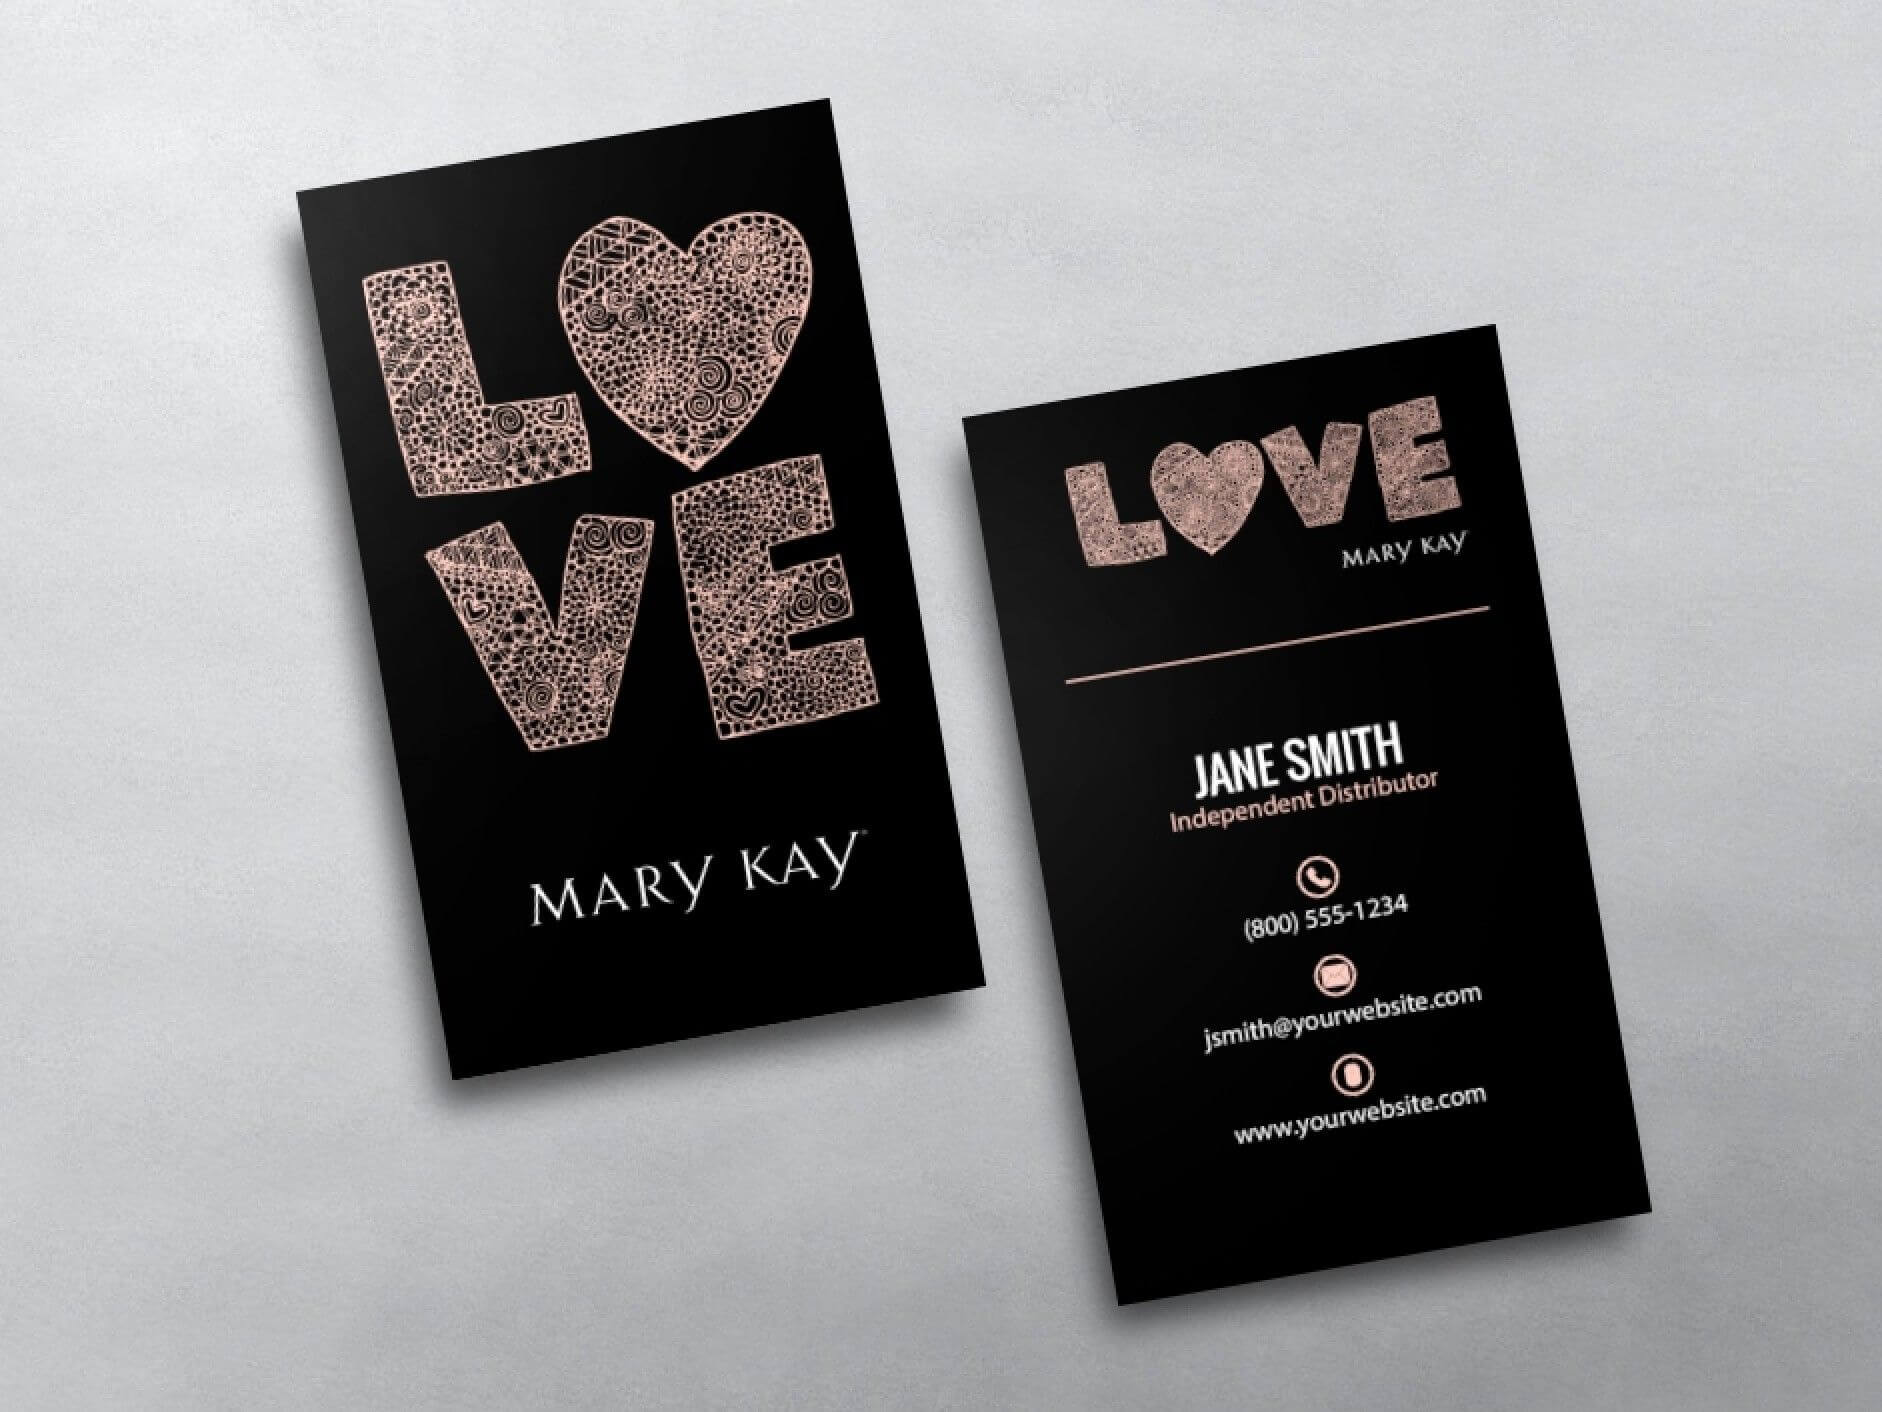 Mary Kay Business Cards In 2019 | Mary Kay, Business Cards Intended For Mary Kay Business Cards Templates Free